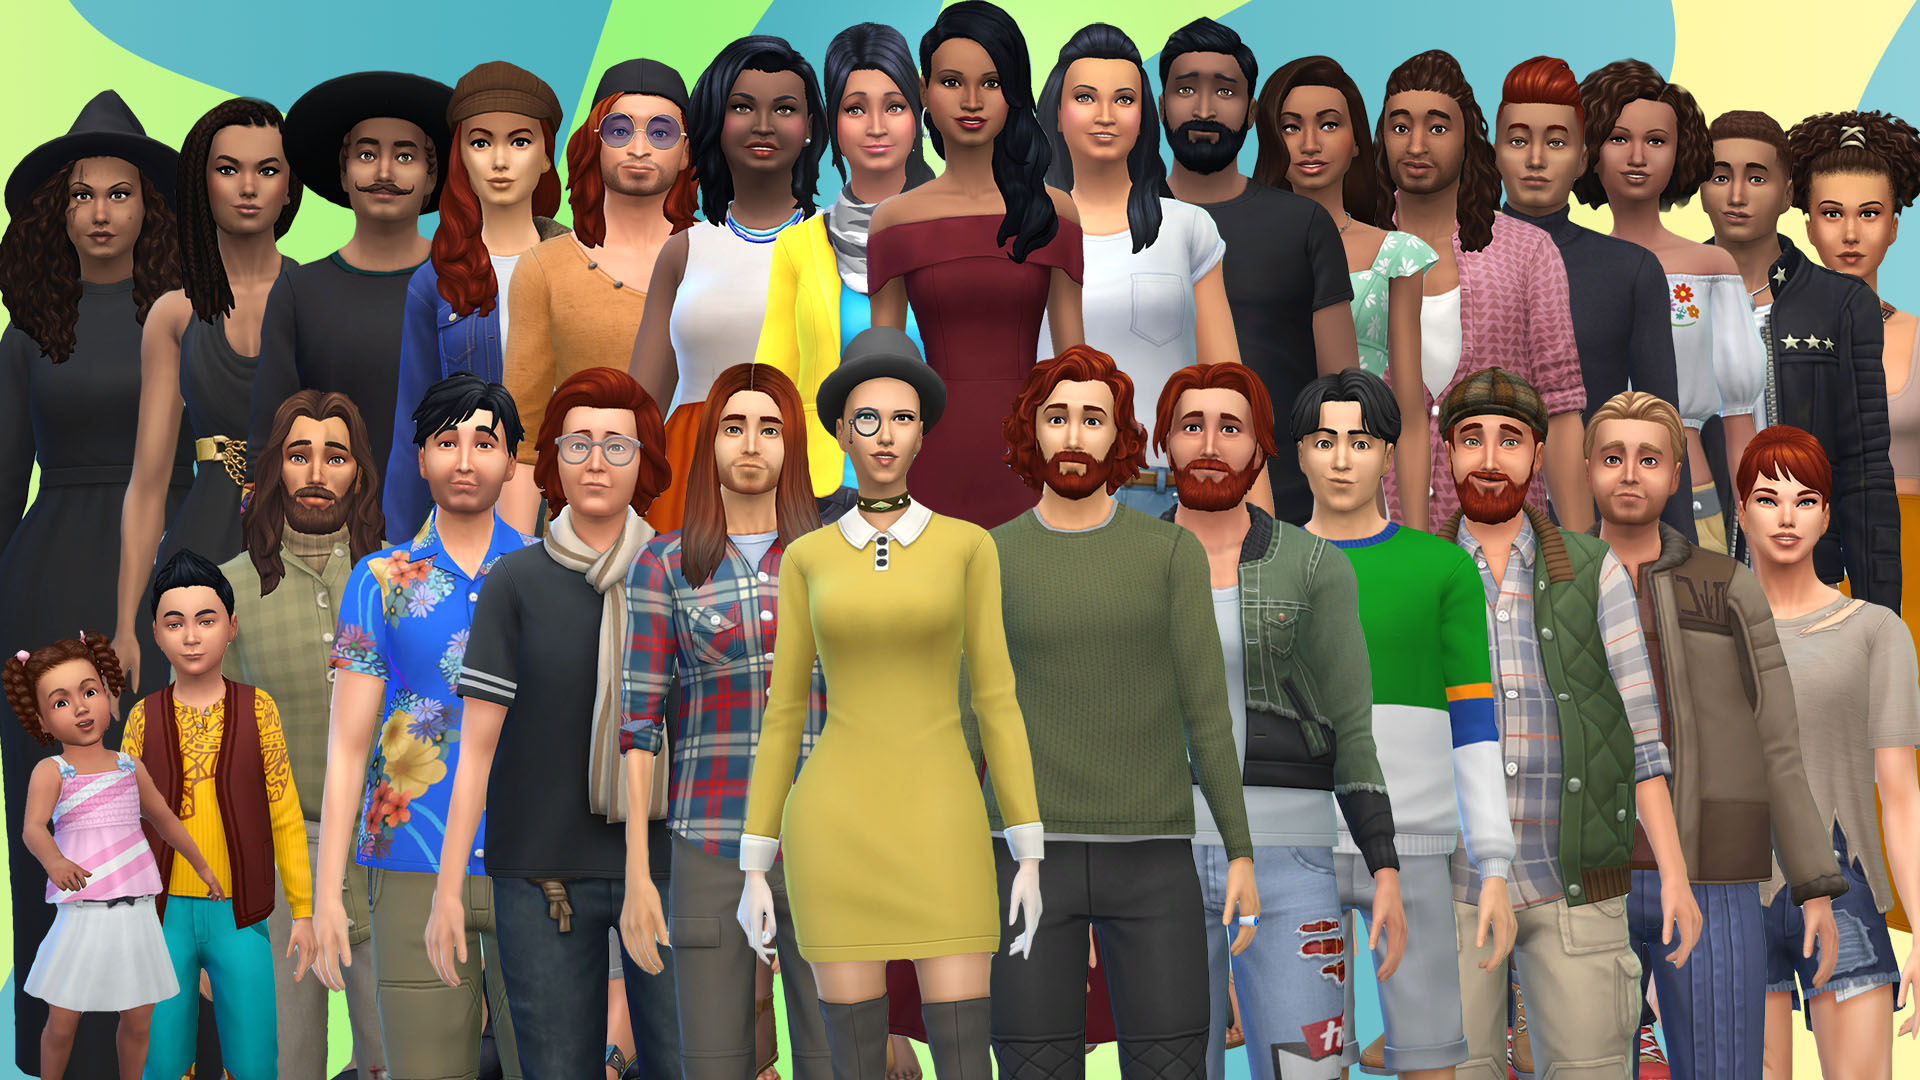 The Sims 4 Get To Work - Rags to Riches, The Sim Supply Wiki